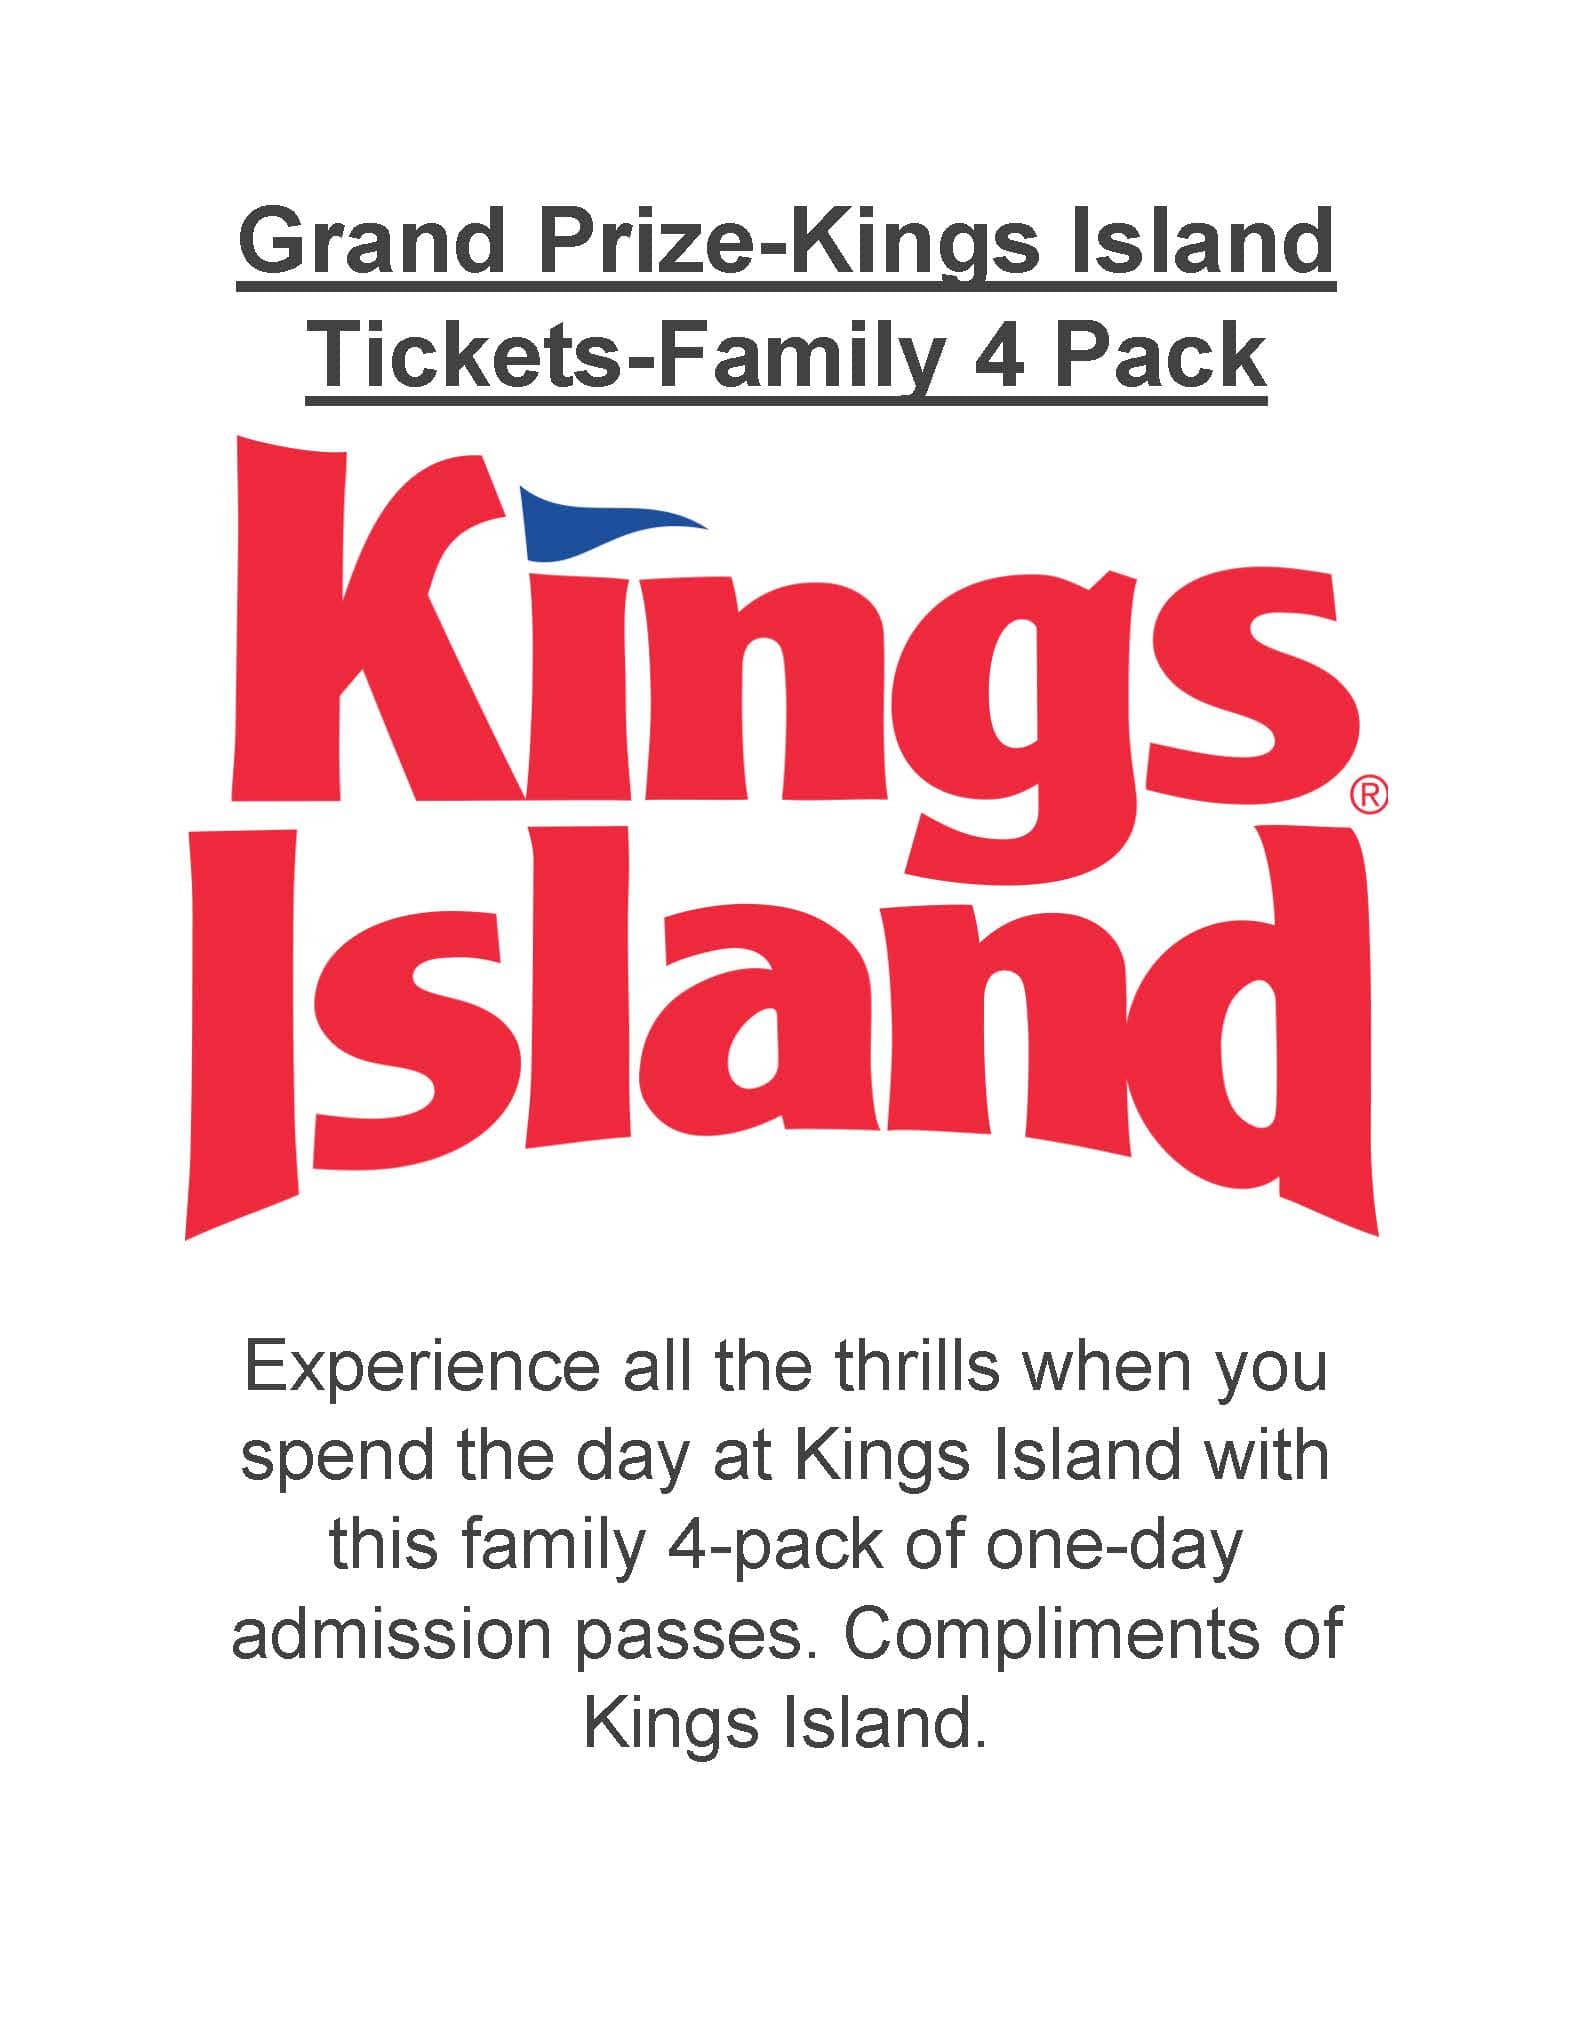 Summer Reading grand prize option - 4 Kings Island tickets